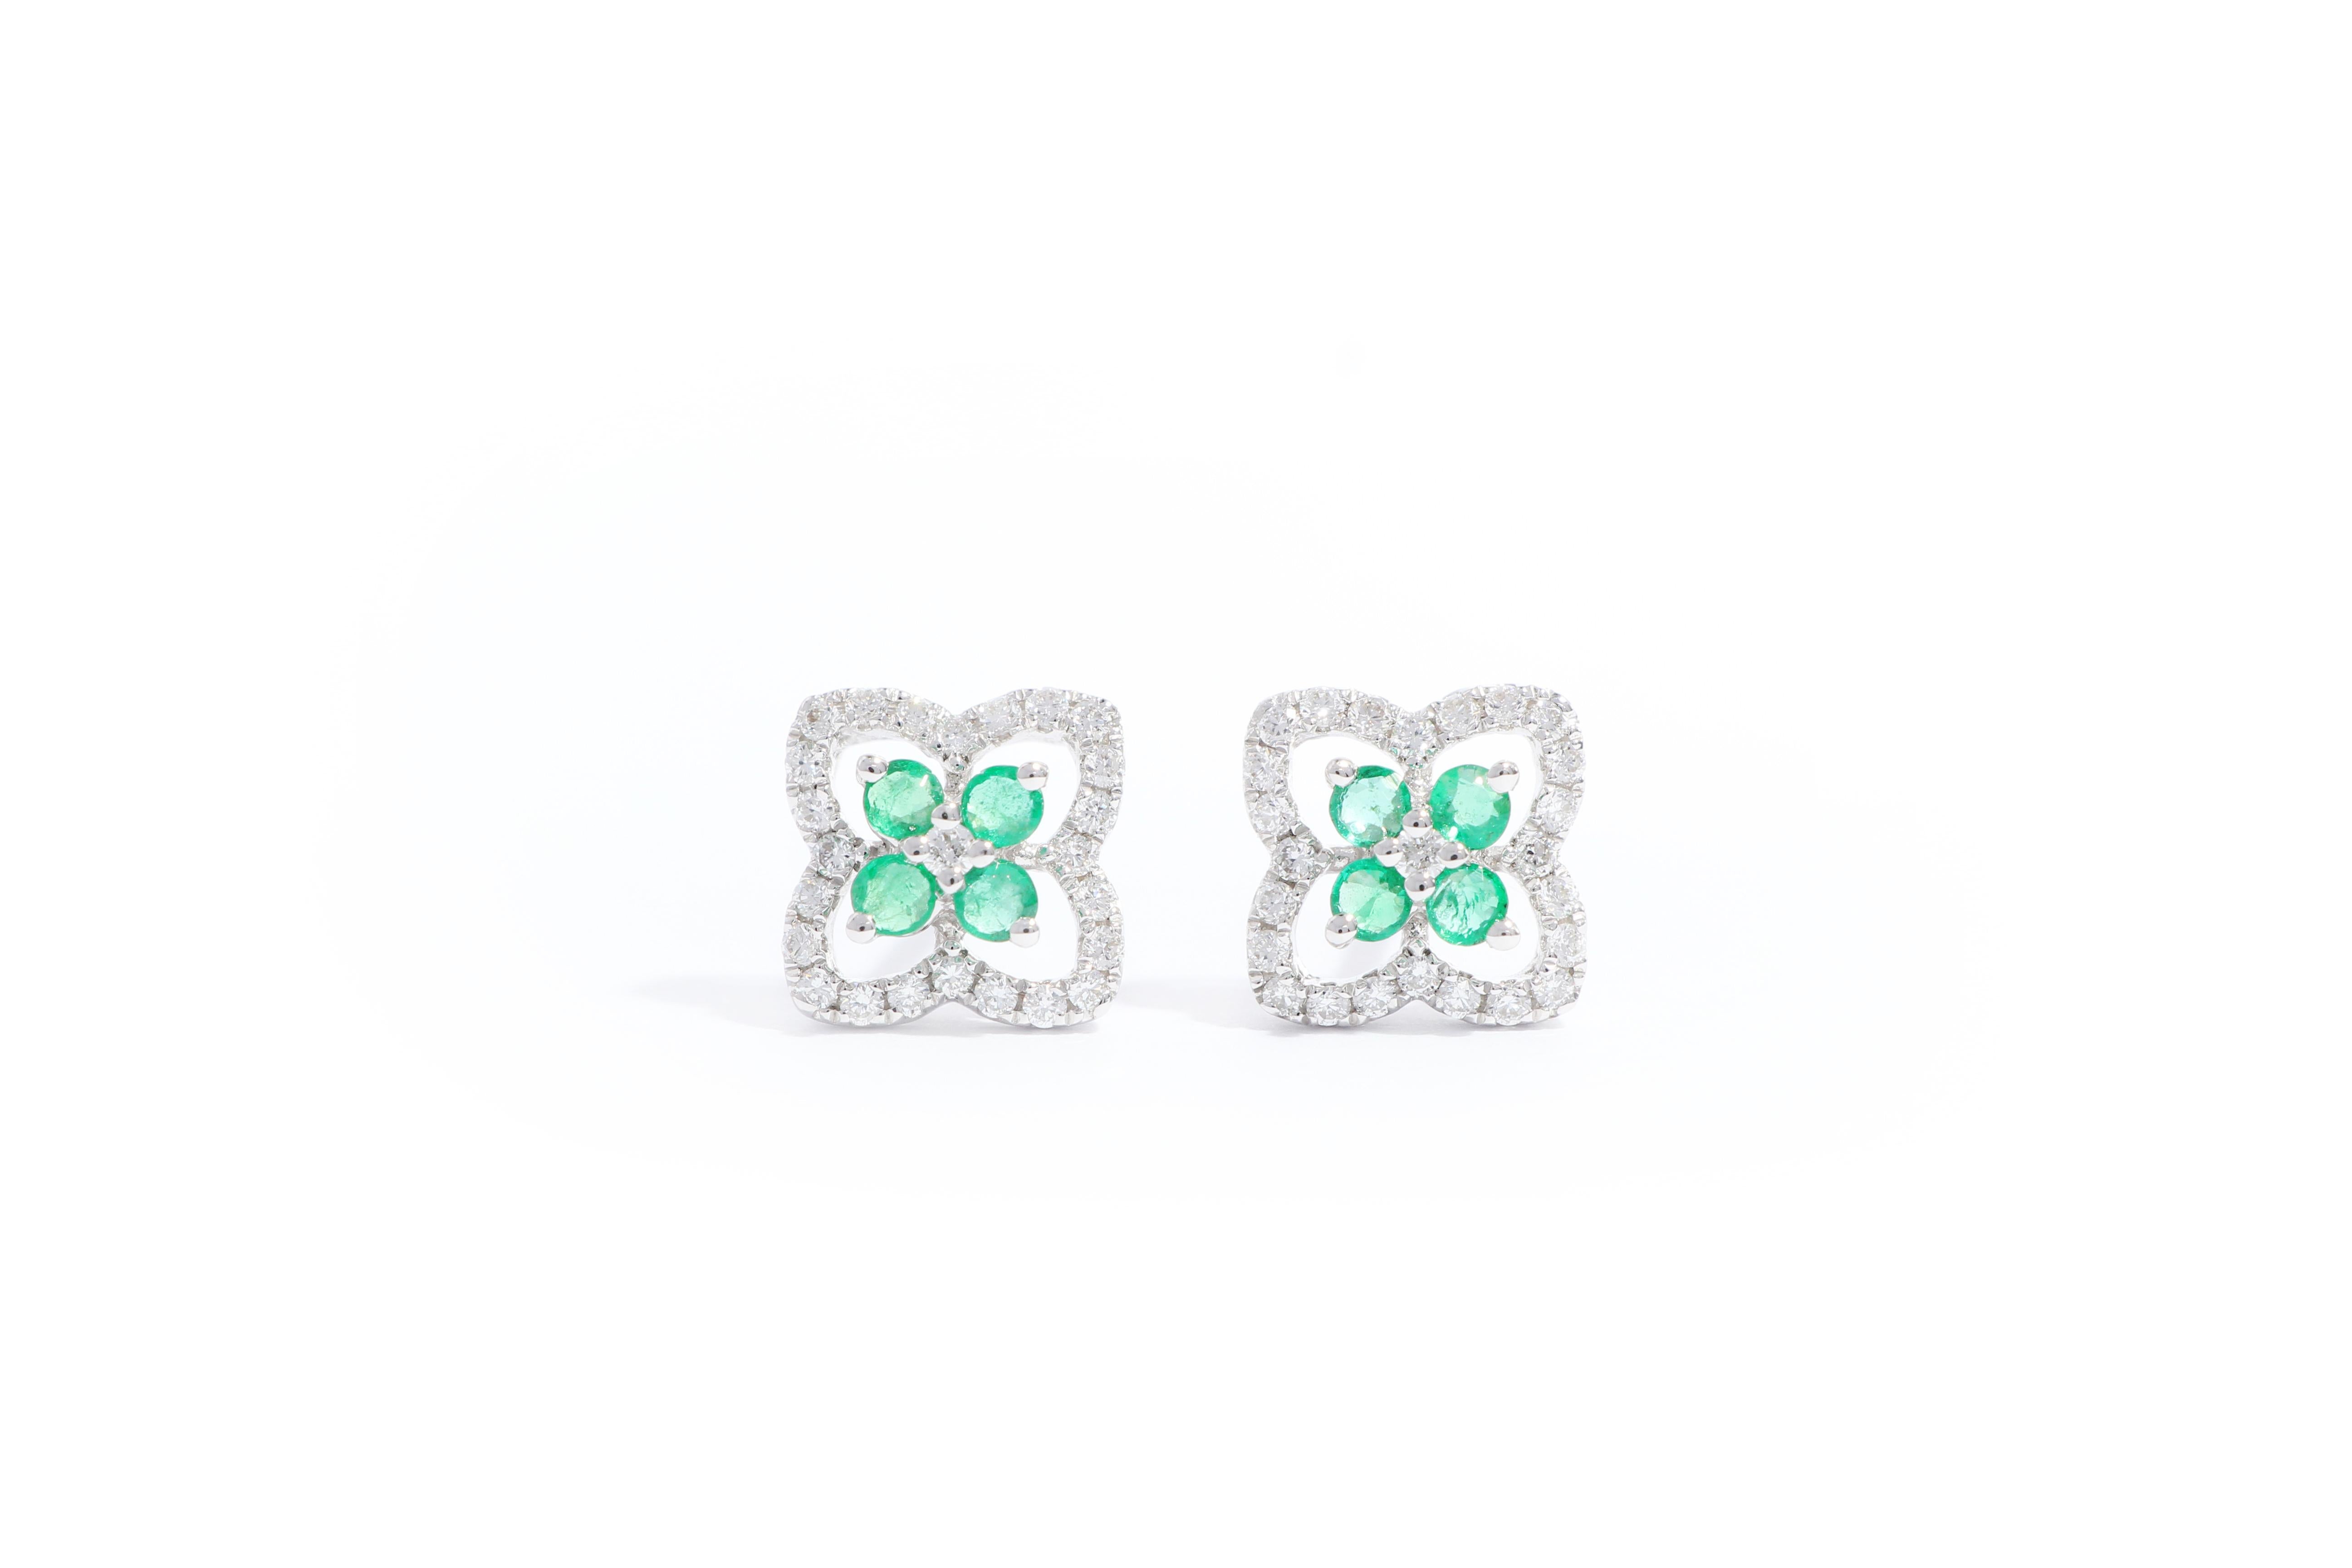 This Art Deco style earrings In the form of four leaf clover , simple and stylish, set with natural brilliant-cut emerald with beautiful green colour totaling 0.21cts, decorated with brilliant-cut diamonds weighing 0.20cts, mounted in 18 karat white